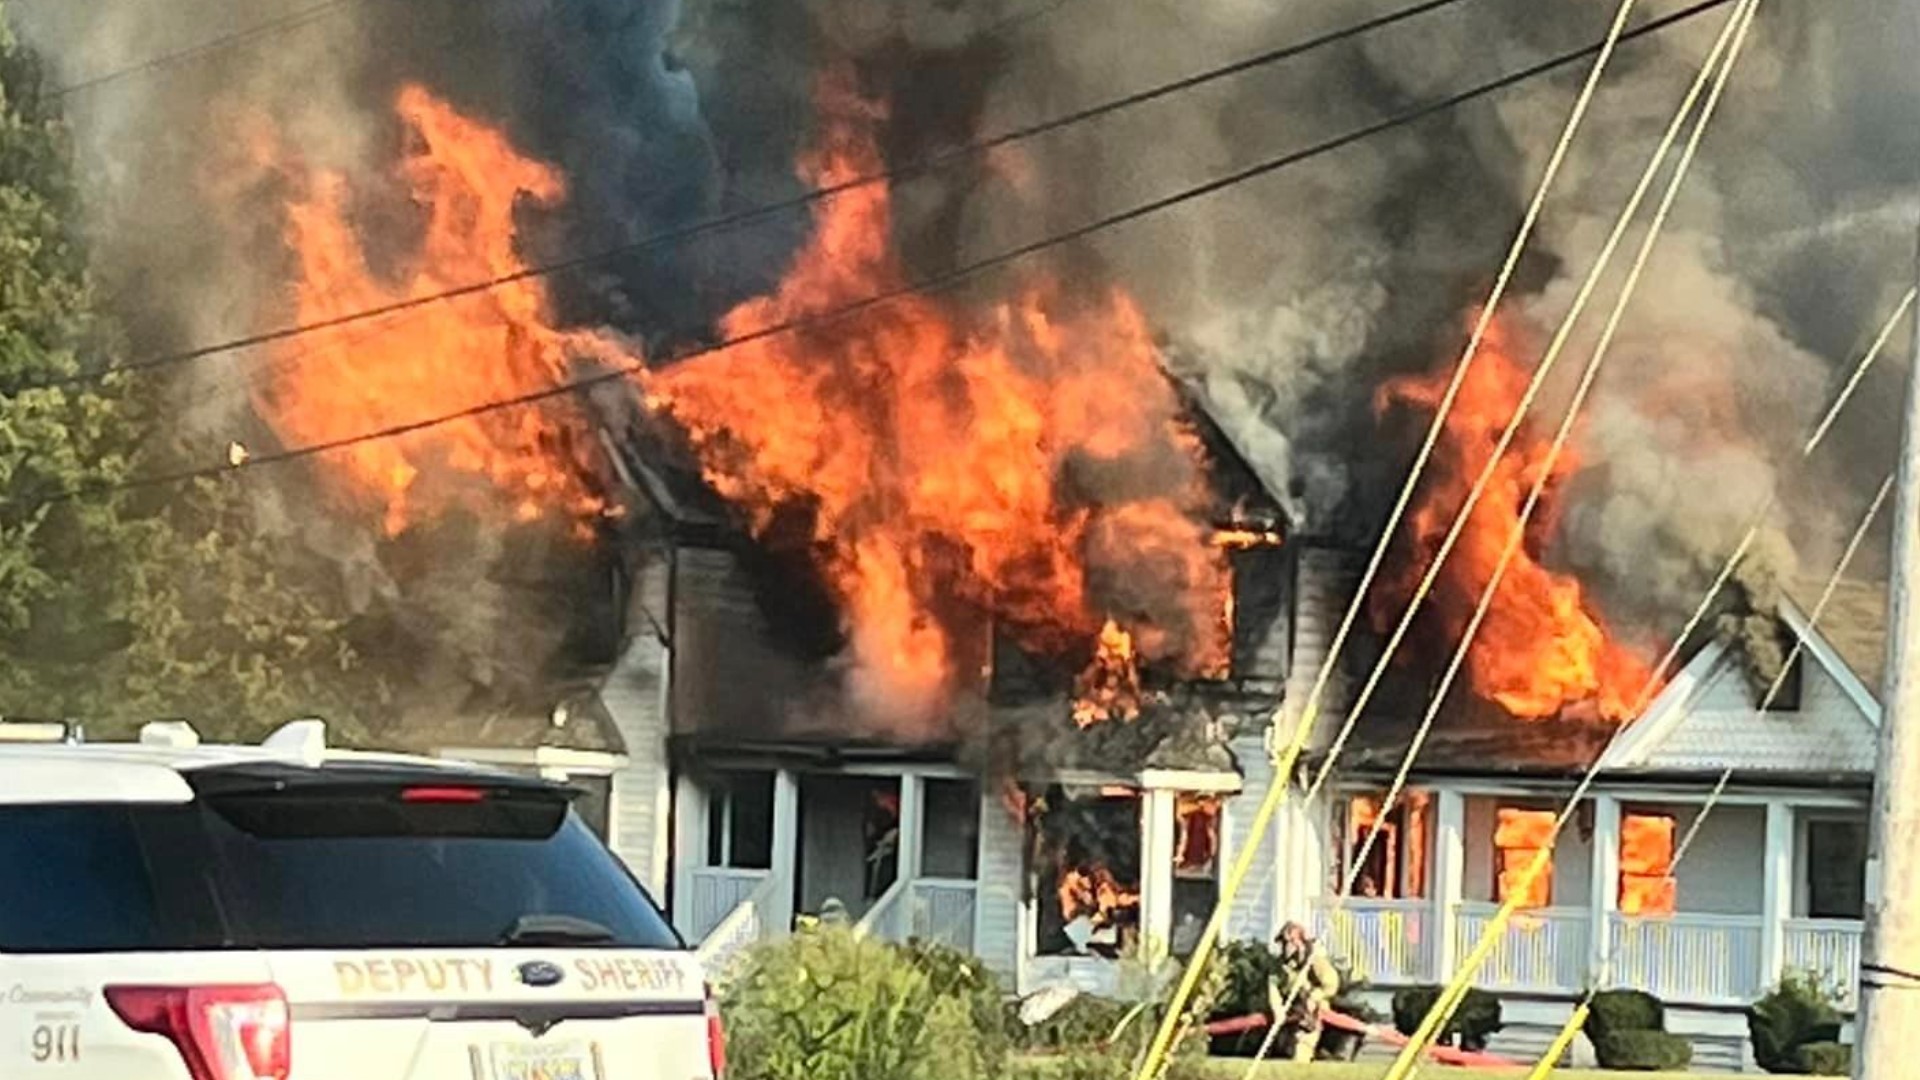 Coweta County Fire and Rescue Chief Robby Flanagan said that the roof eventually collapsed in and is now likely to be rendered a total loss.